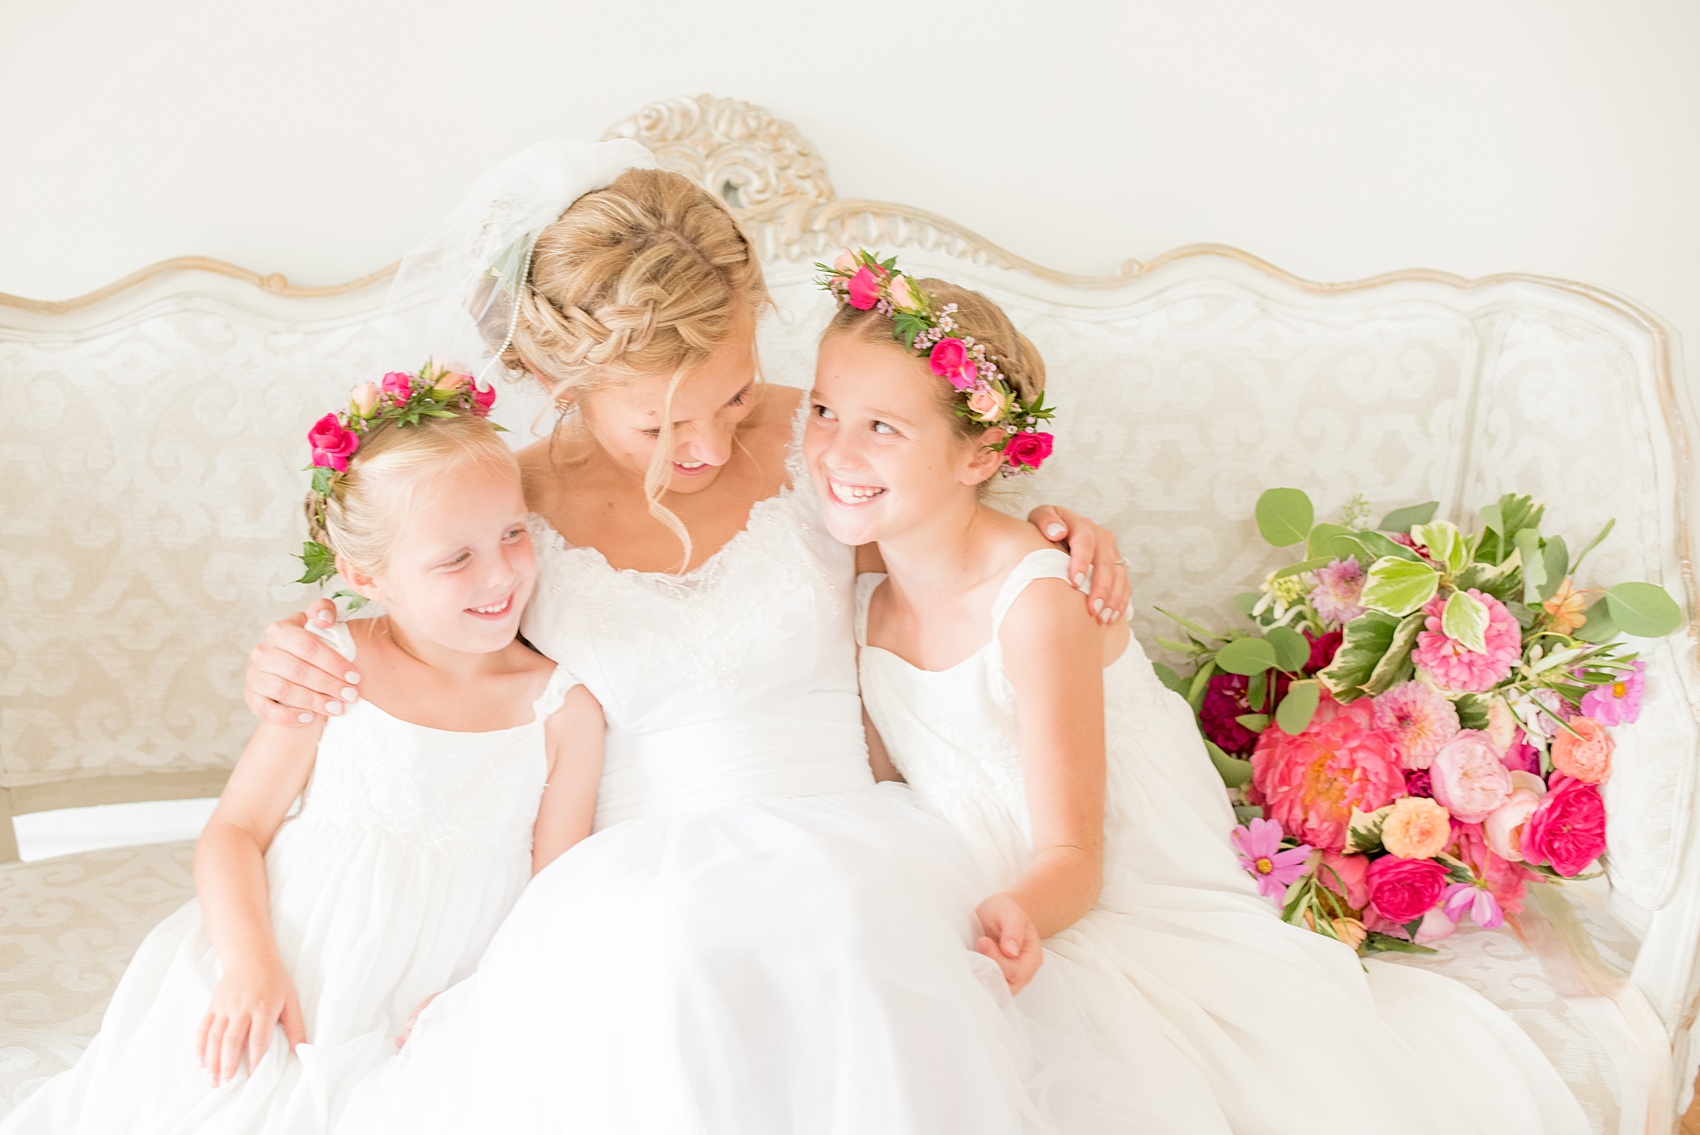 Mikkel Paige Photography wedding photos at The Merrimon-Wynne House in downtown Raleigh. The bride with her two flower girls in colorful floral crowns by Meristem Floral.